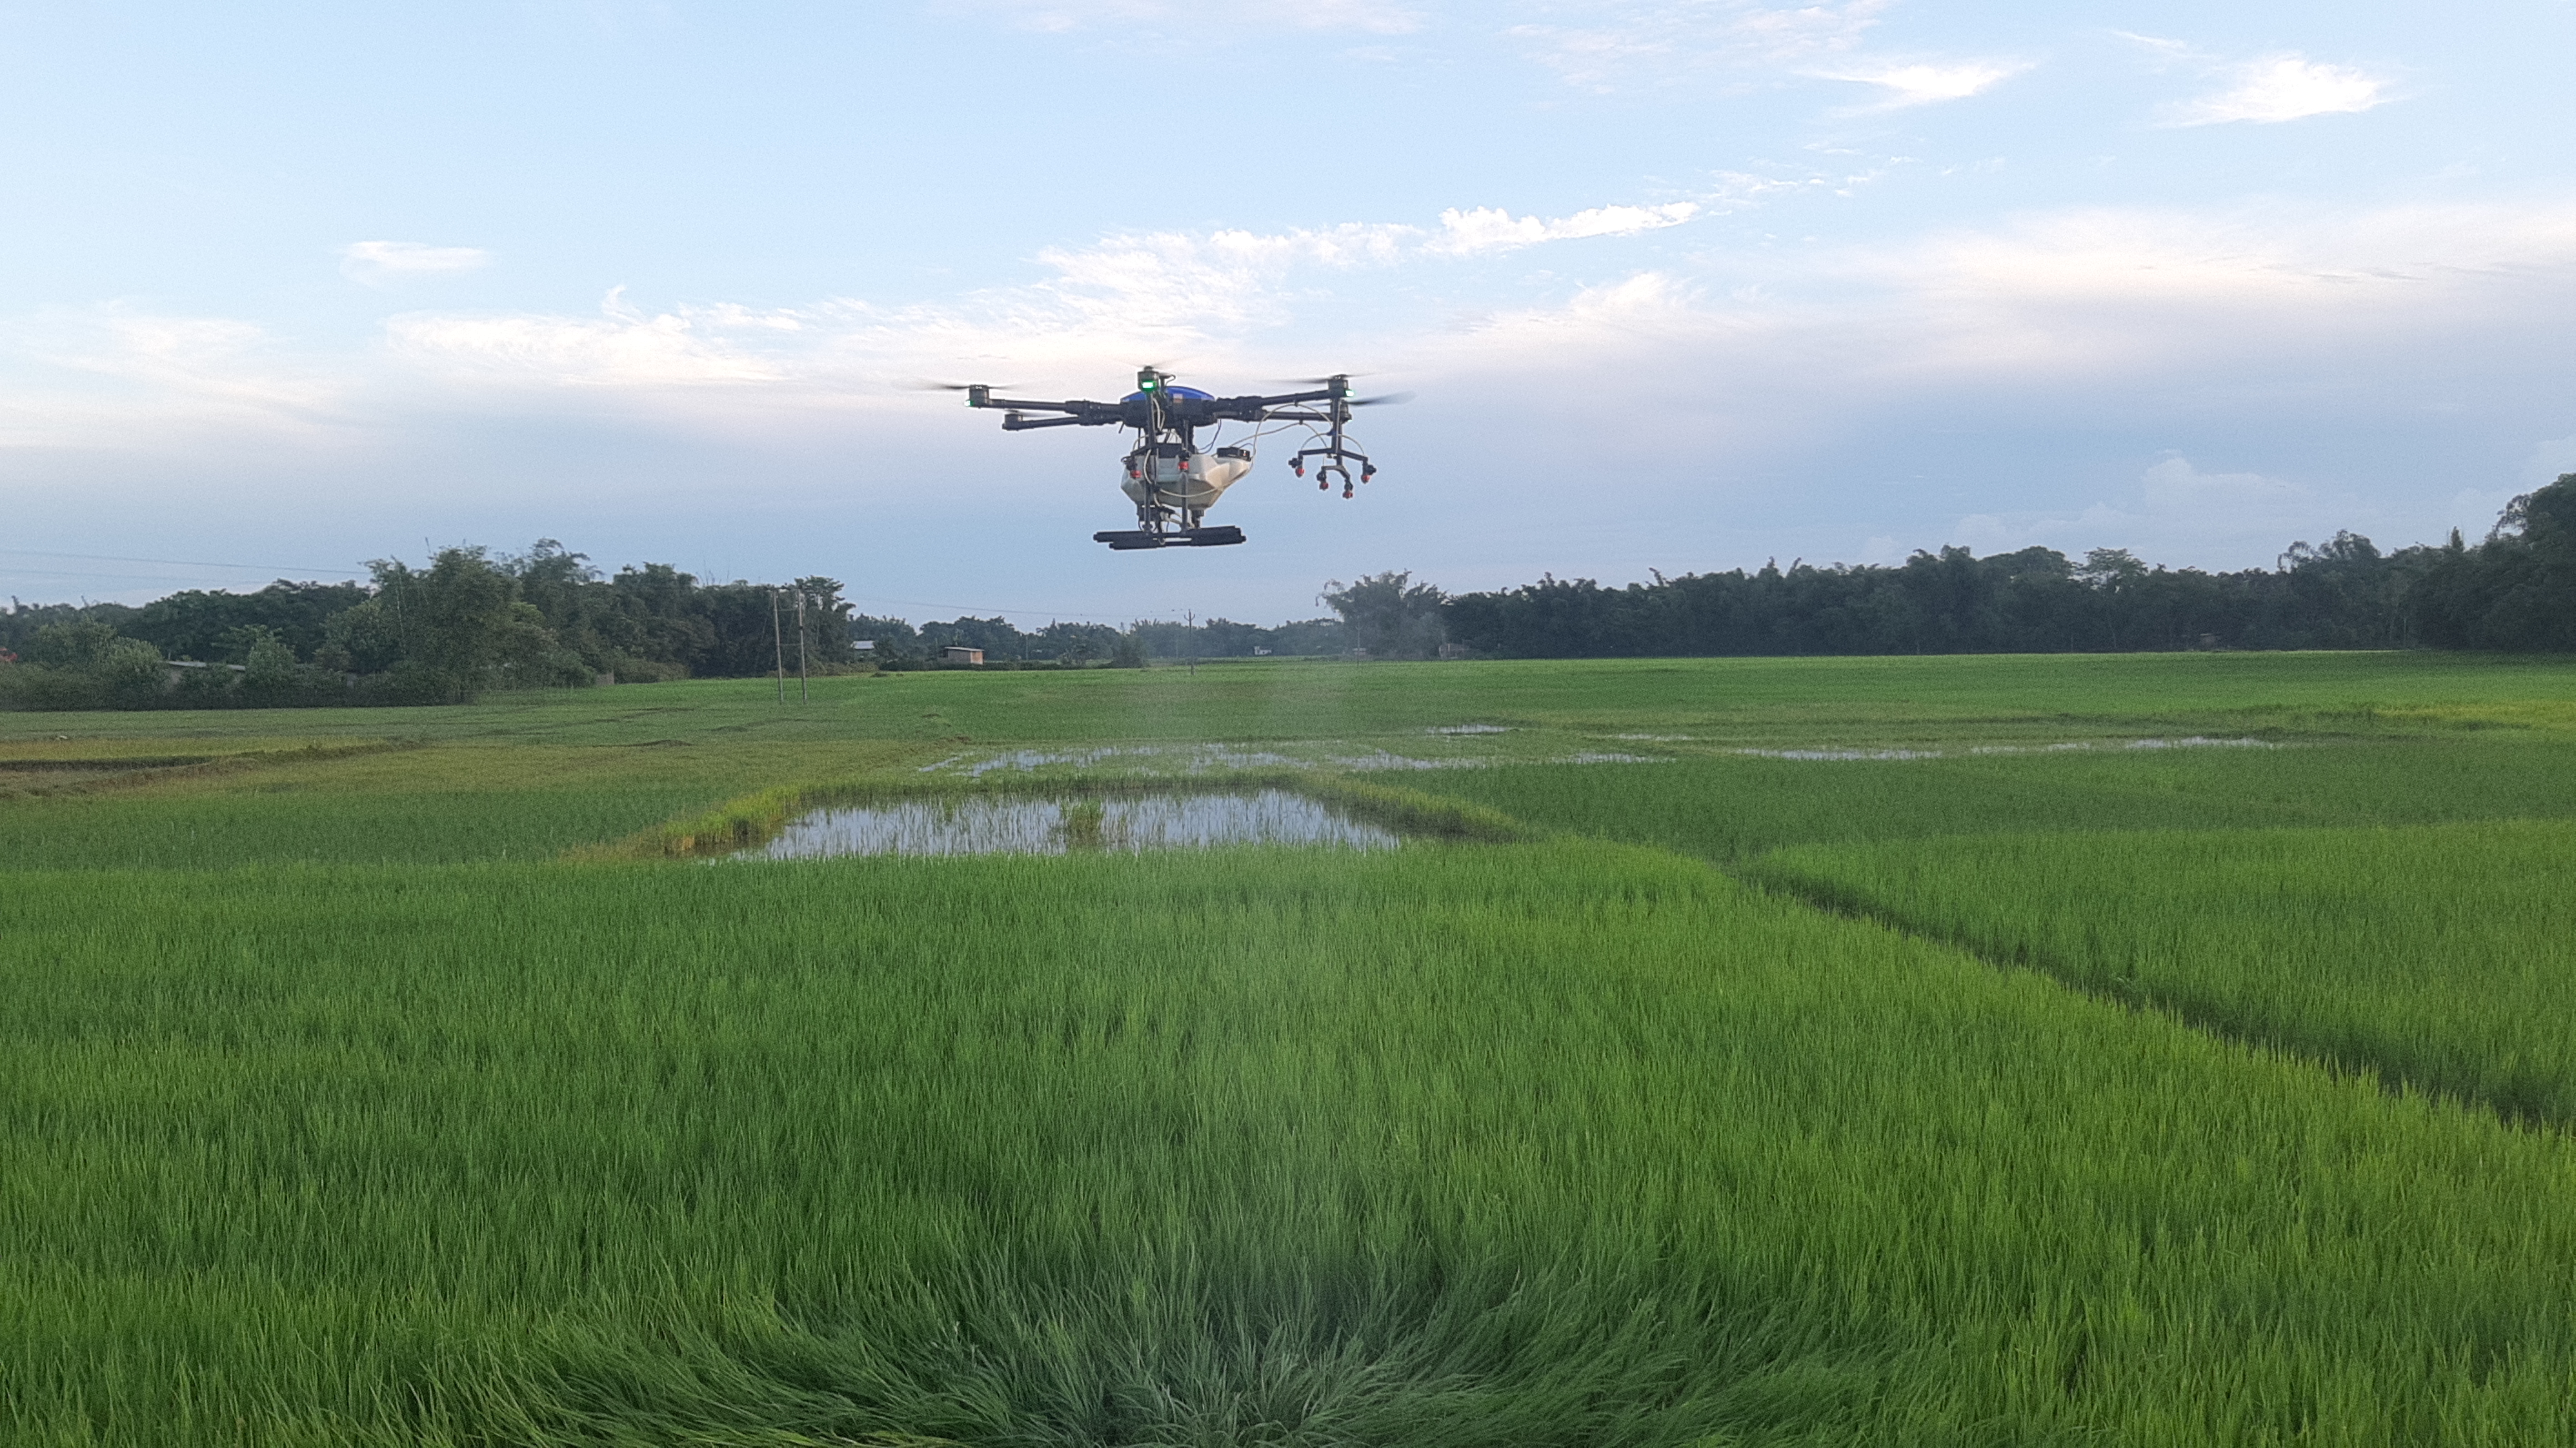 Fertilizers and pesticides applied to agriculture by drones